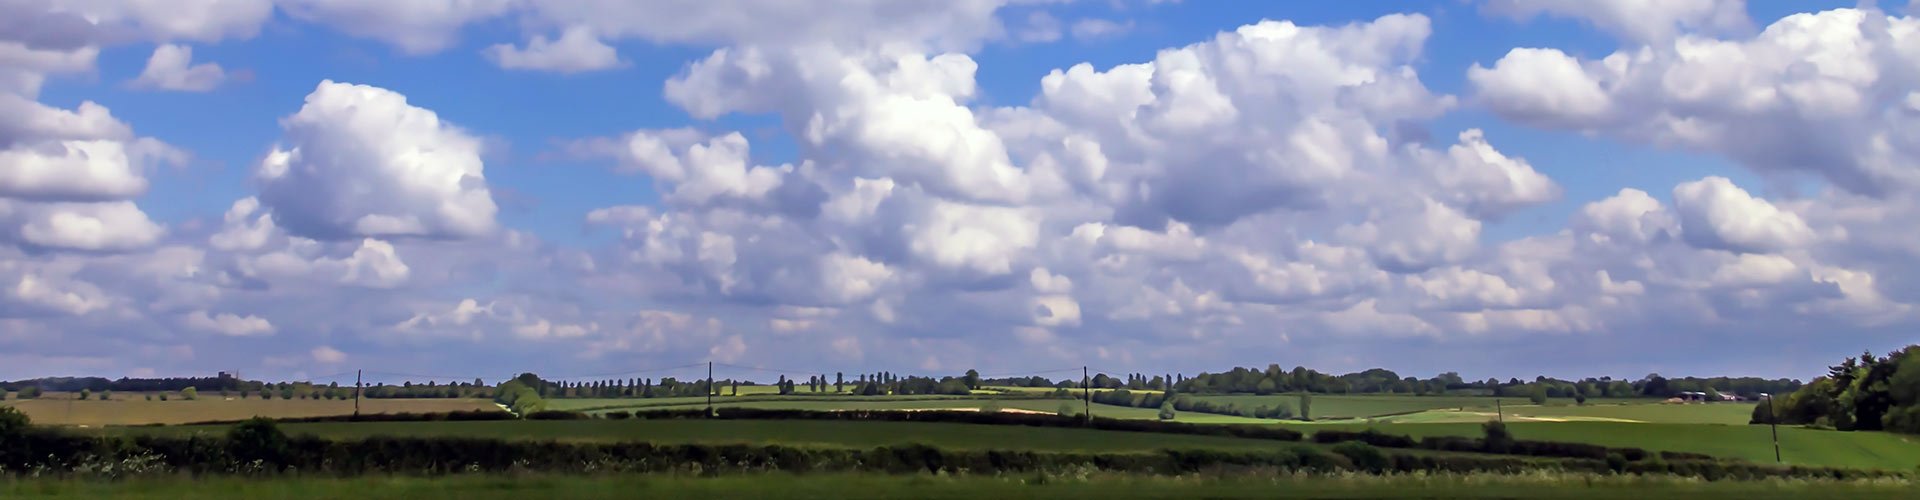 English summer cloudy day landscape along the highway A44